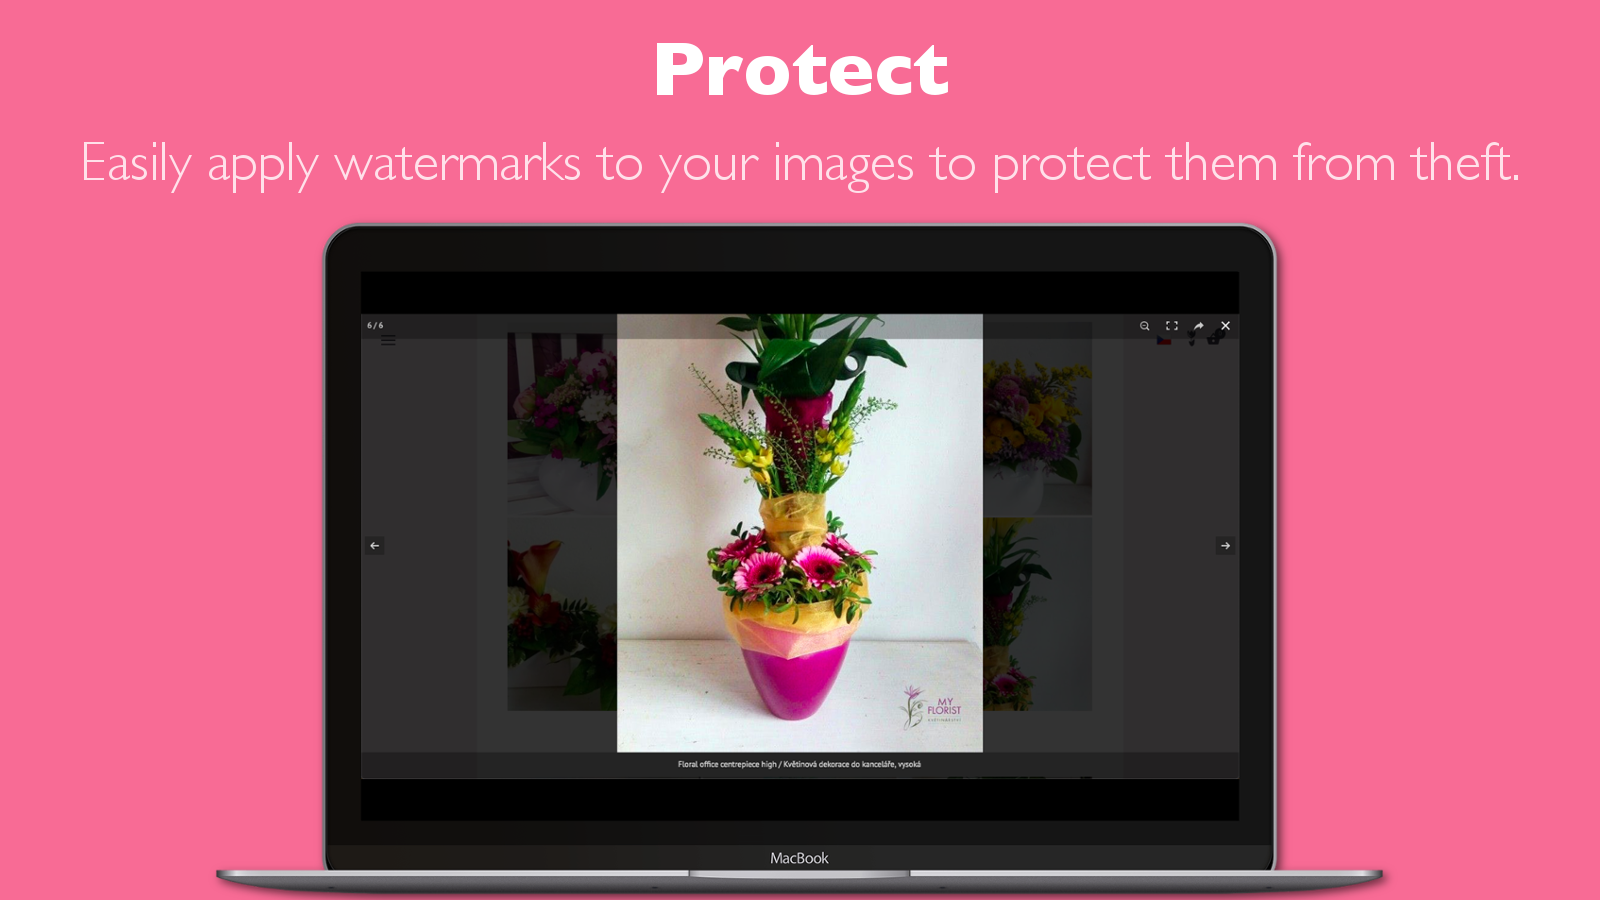 Apply watermarks to your photo gallery images to protect them.